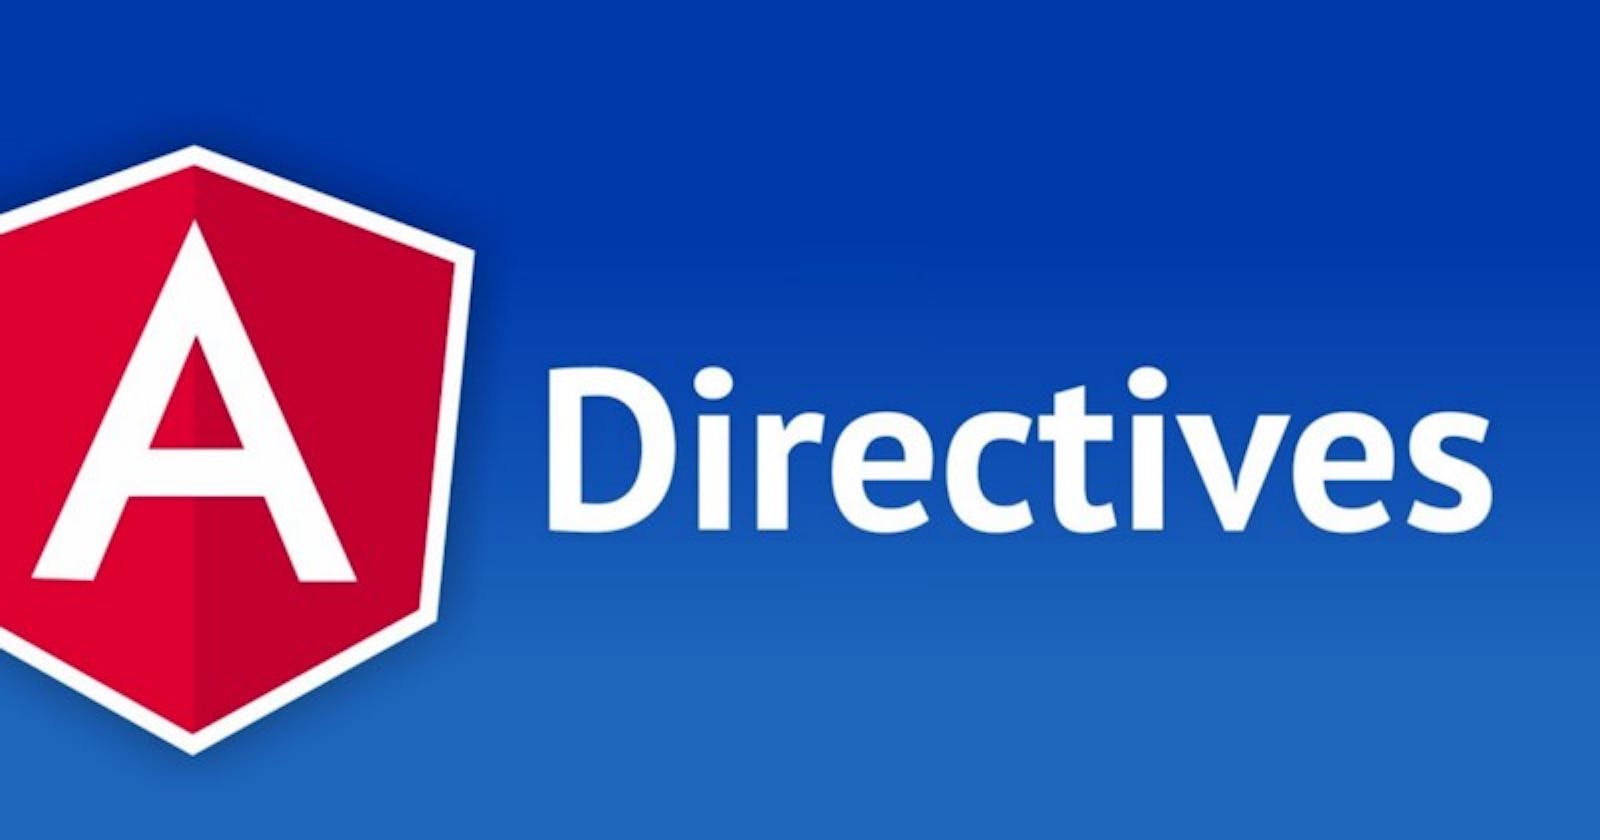 Angular Built-In Directives